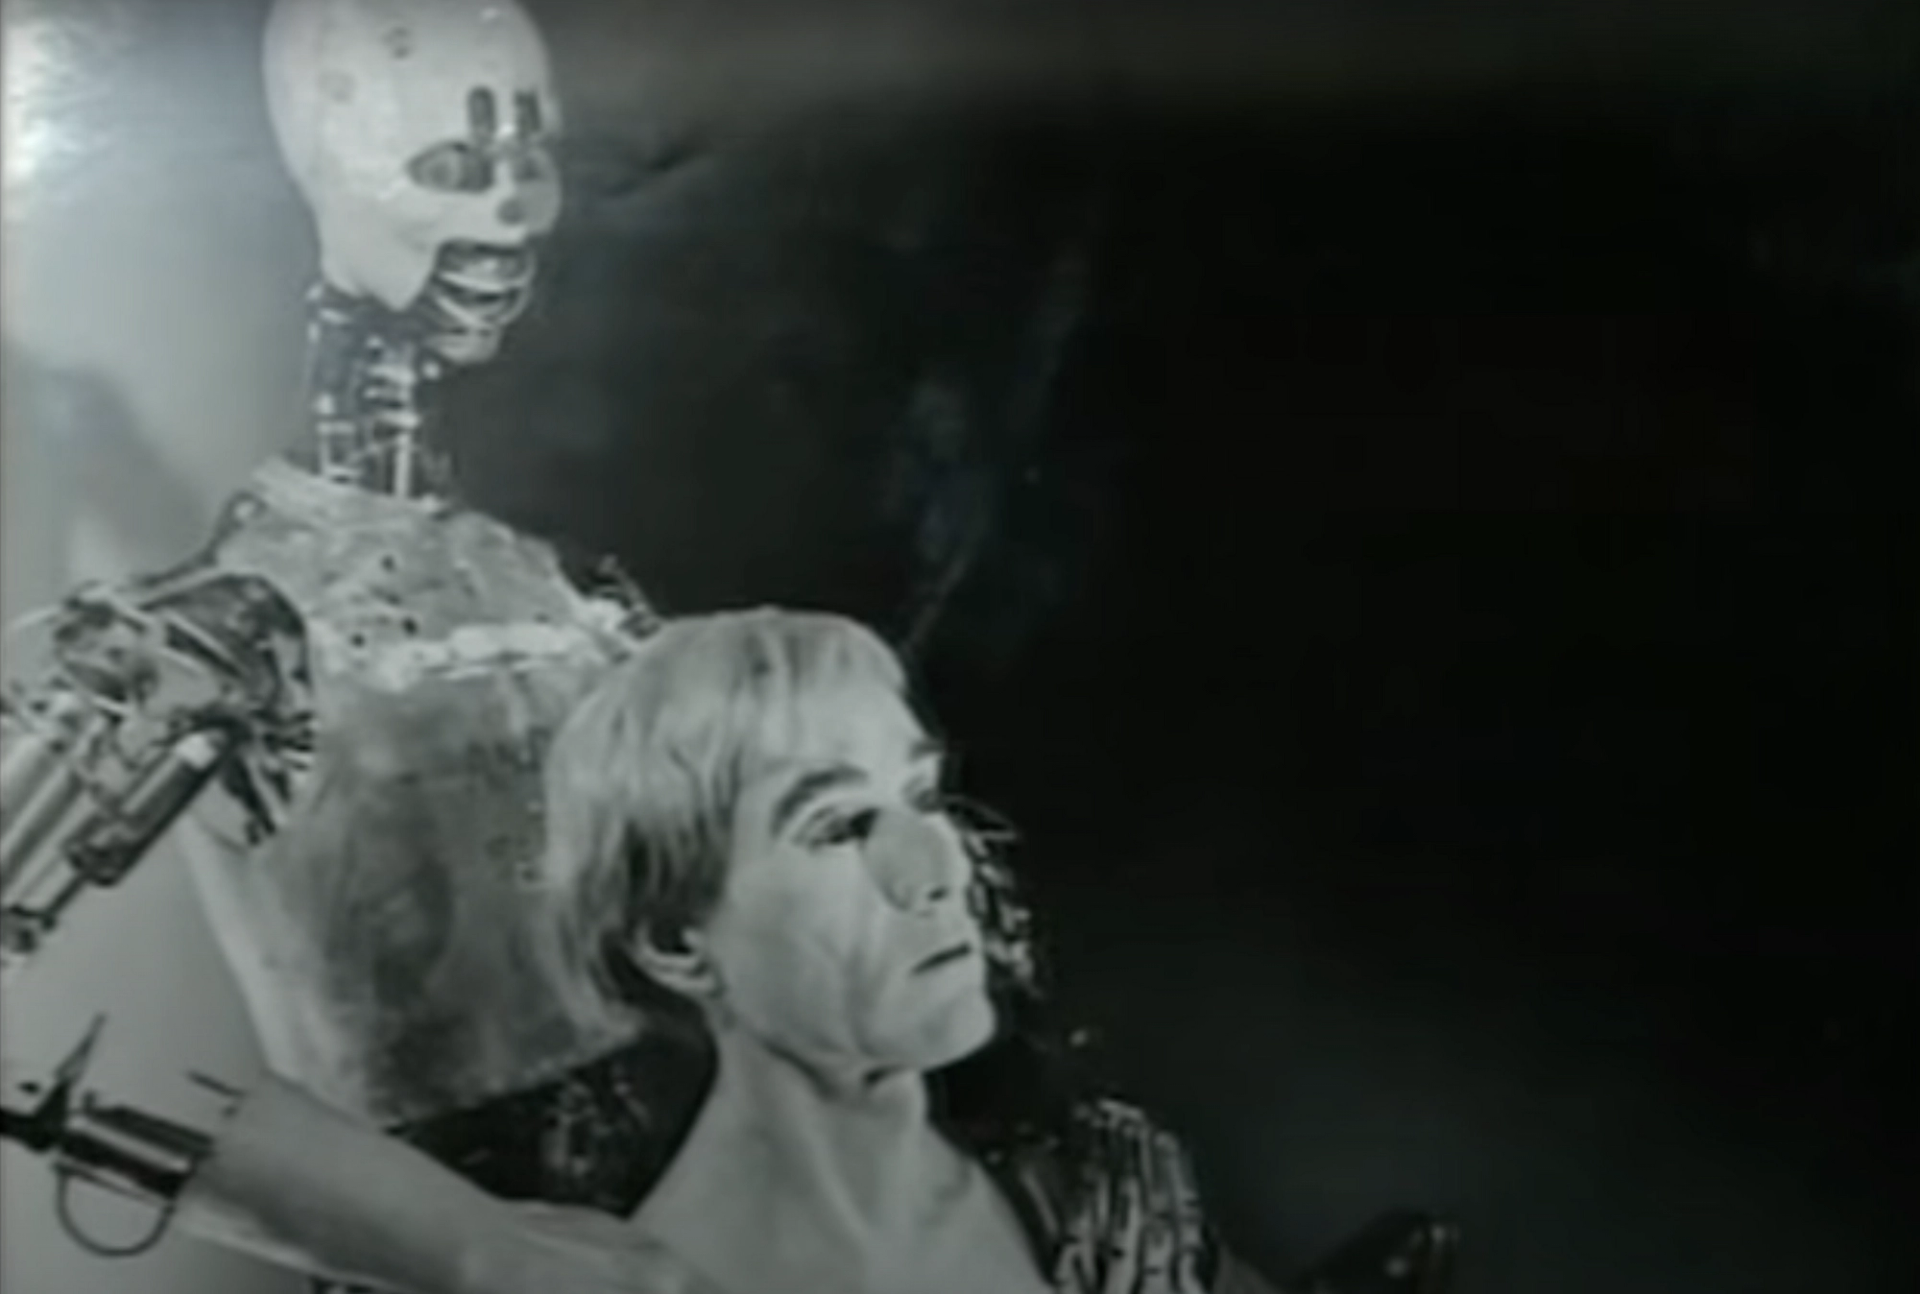 A screenshot of a video showing the face of Andy Warhol's 1981 Robot, in the likeness of the artist, being held by a larger metallic robot.